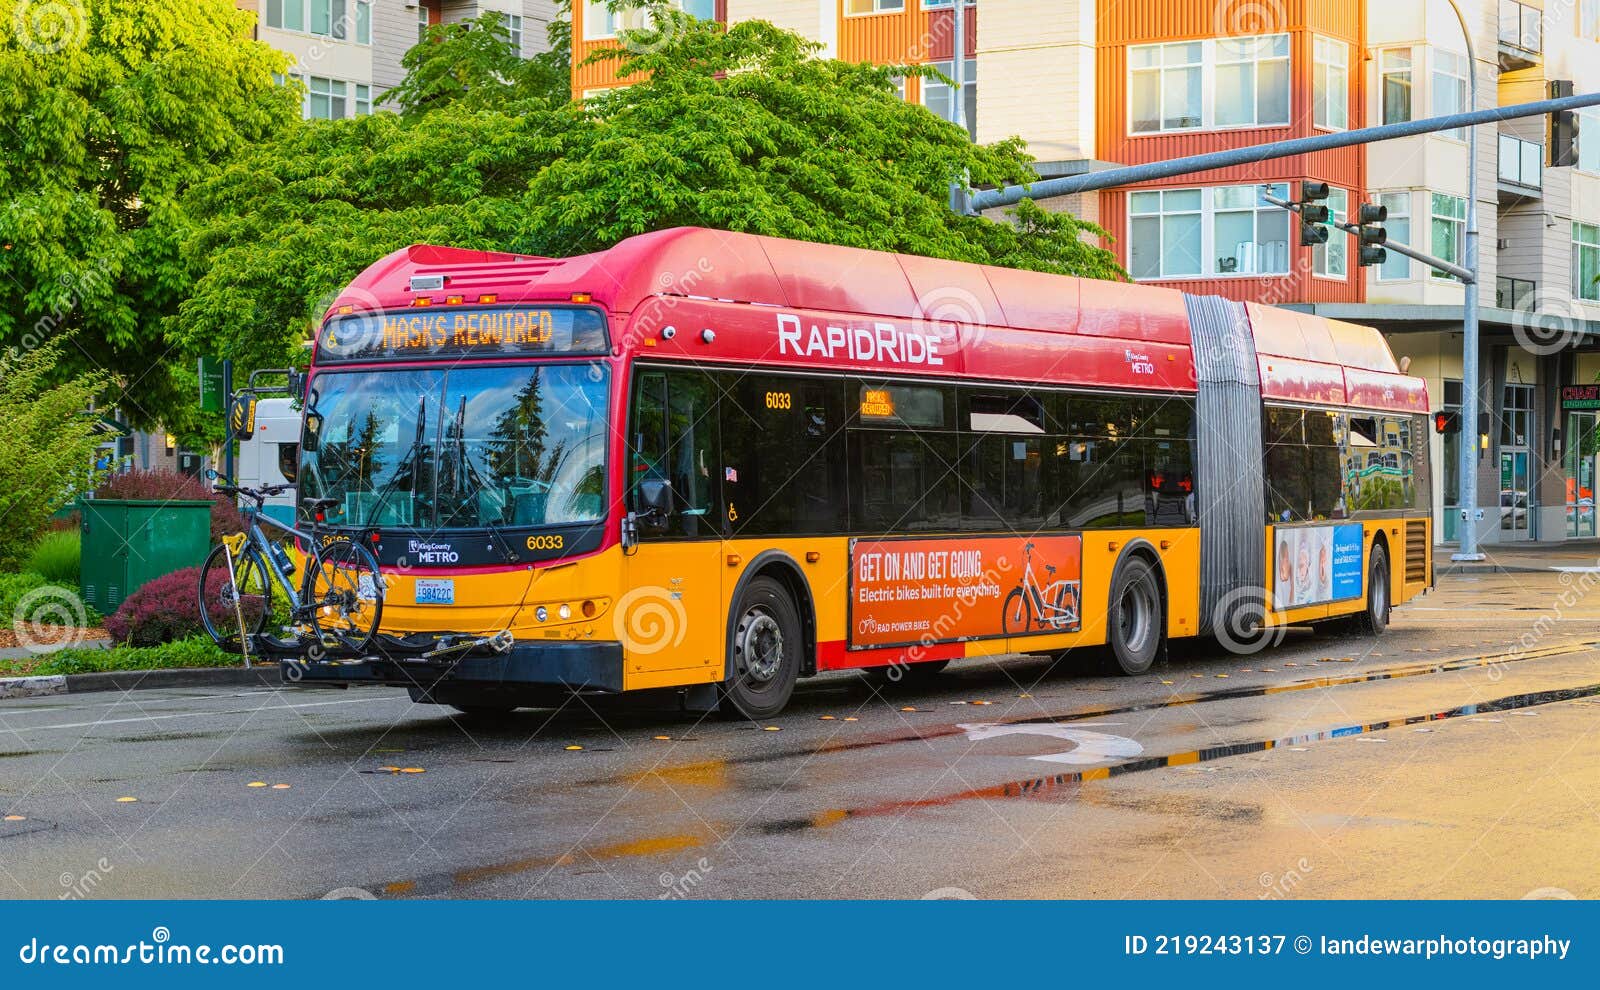 https://thumbs.dreamstime.com/z/king-county-metro-articulated-bus-downtown-redmond-wa-usa-may-rapid-ride-washington-rain-travelling-wet-streets-219243137.jpg